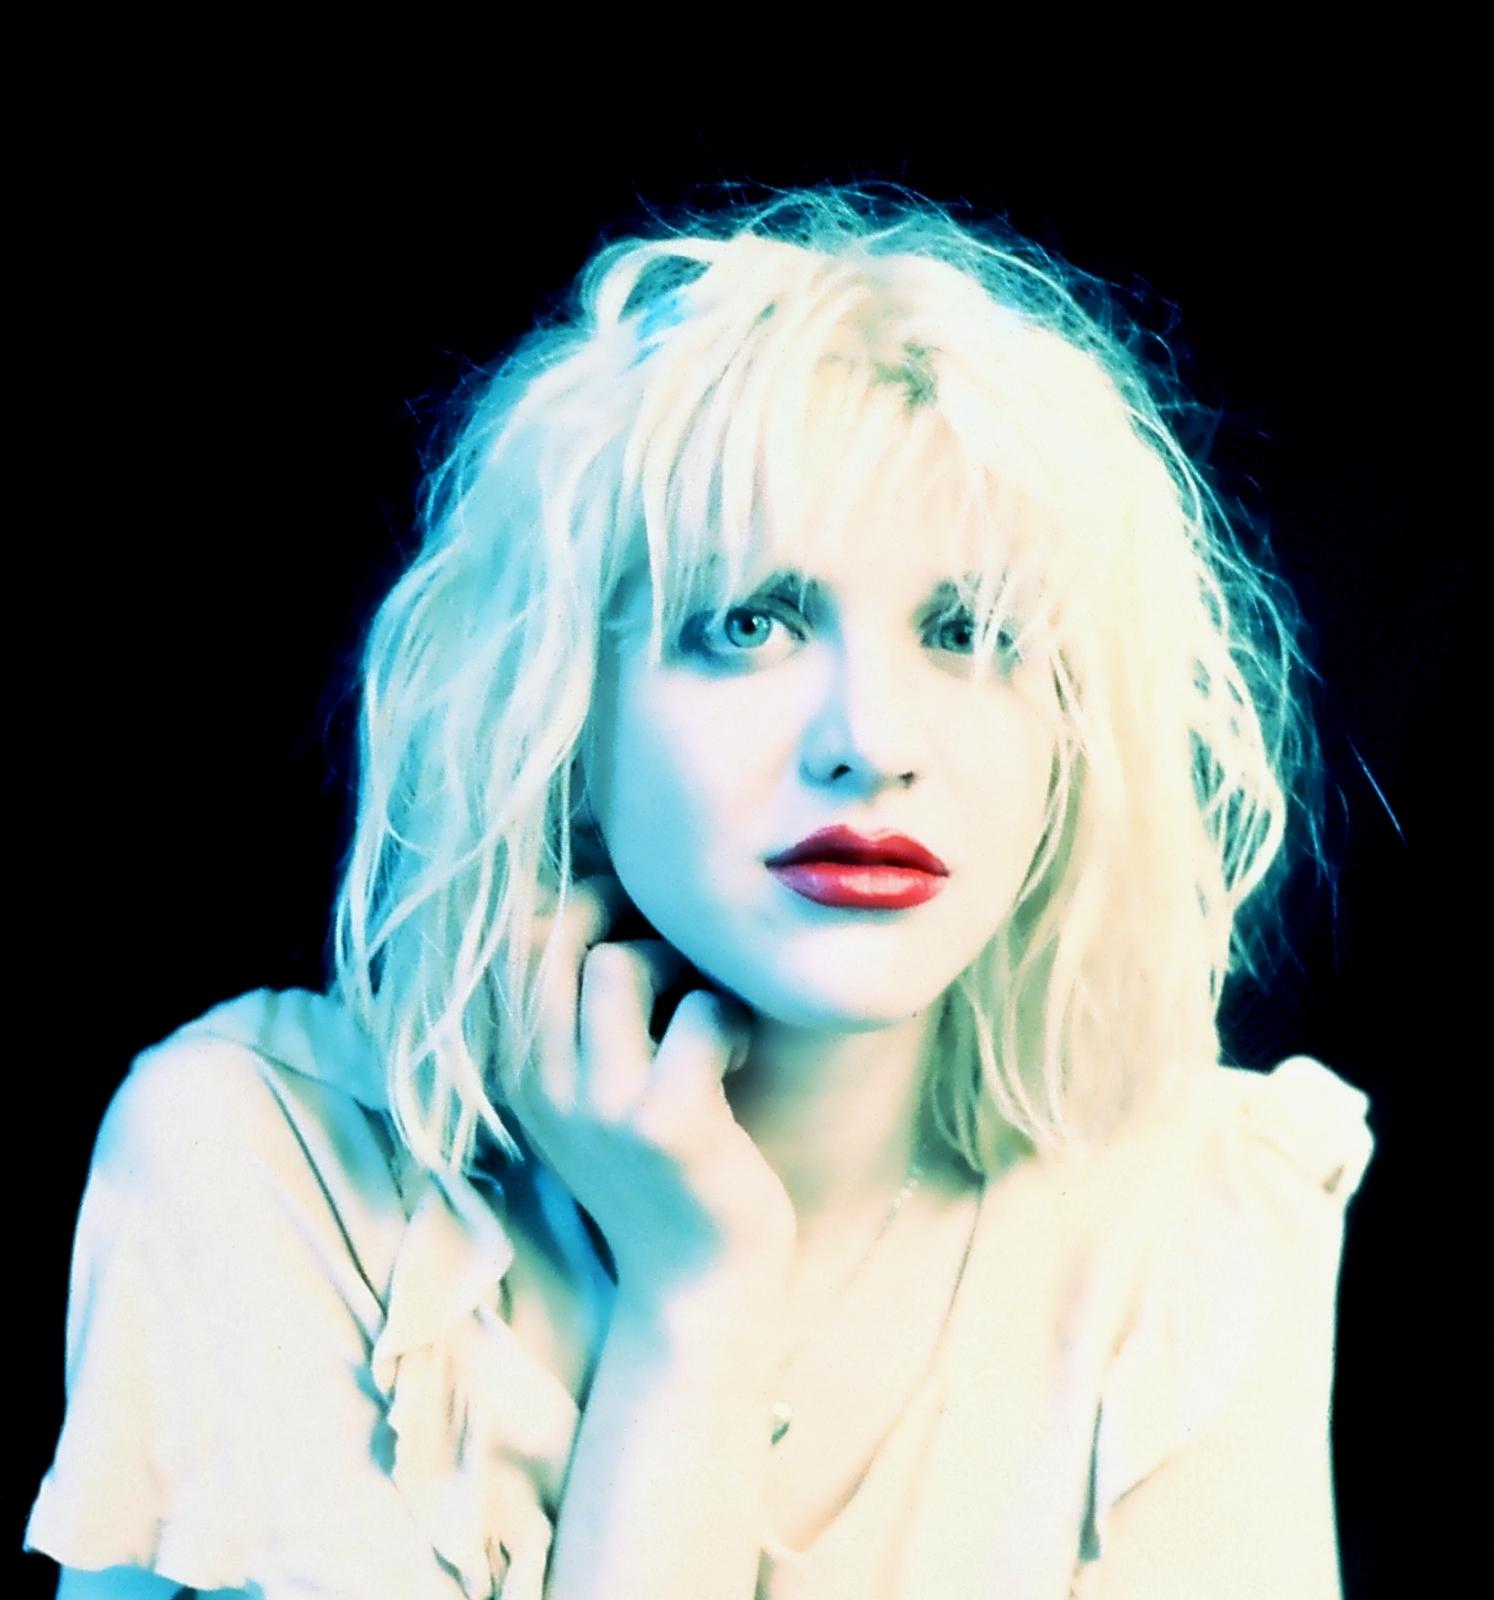 Courtney Love image Courtney HD wallpaper and background photo